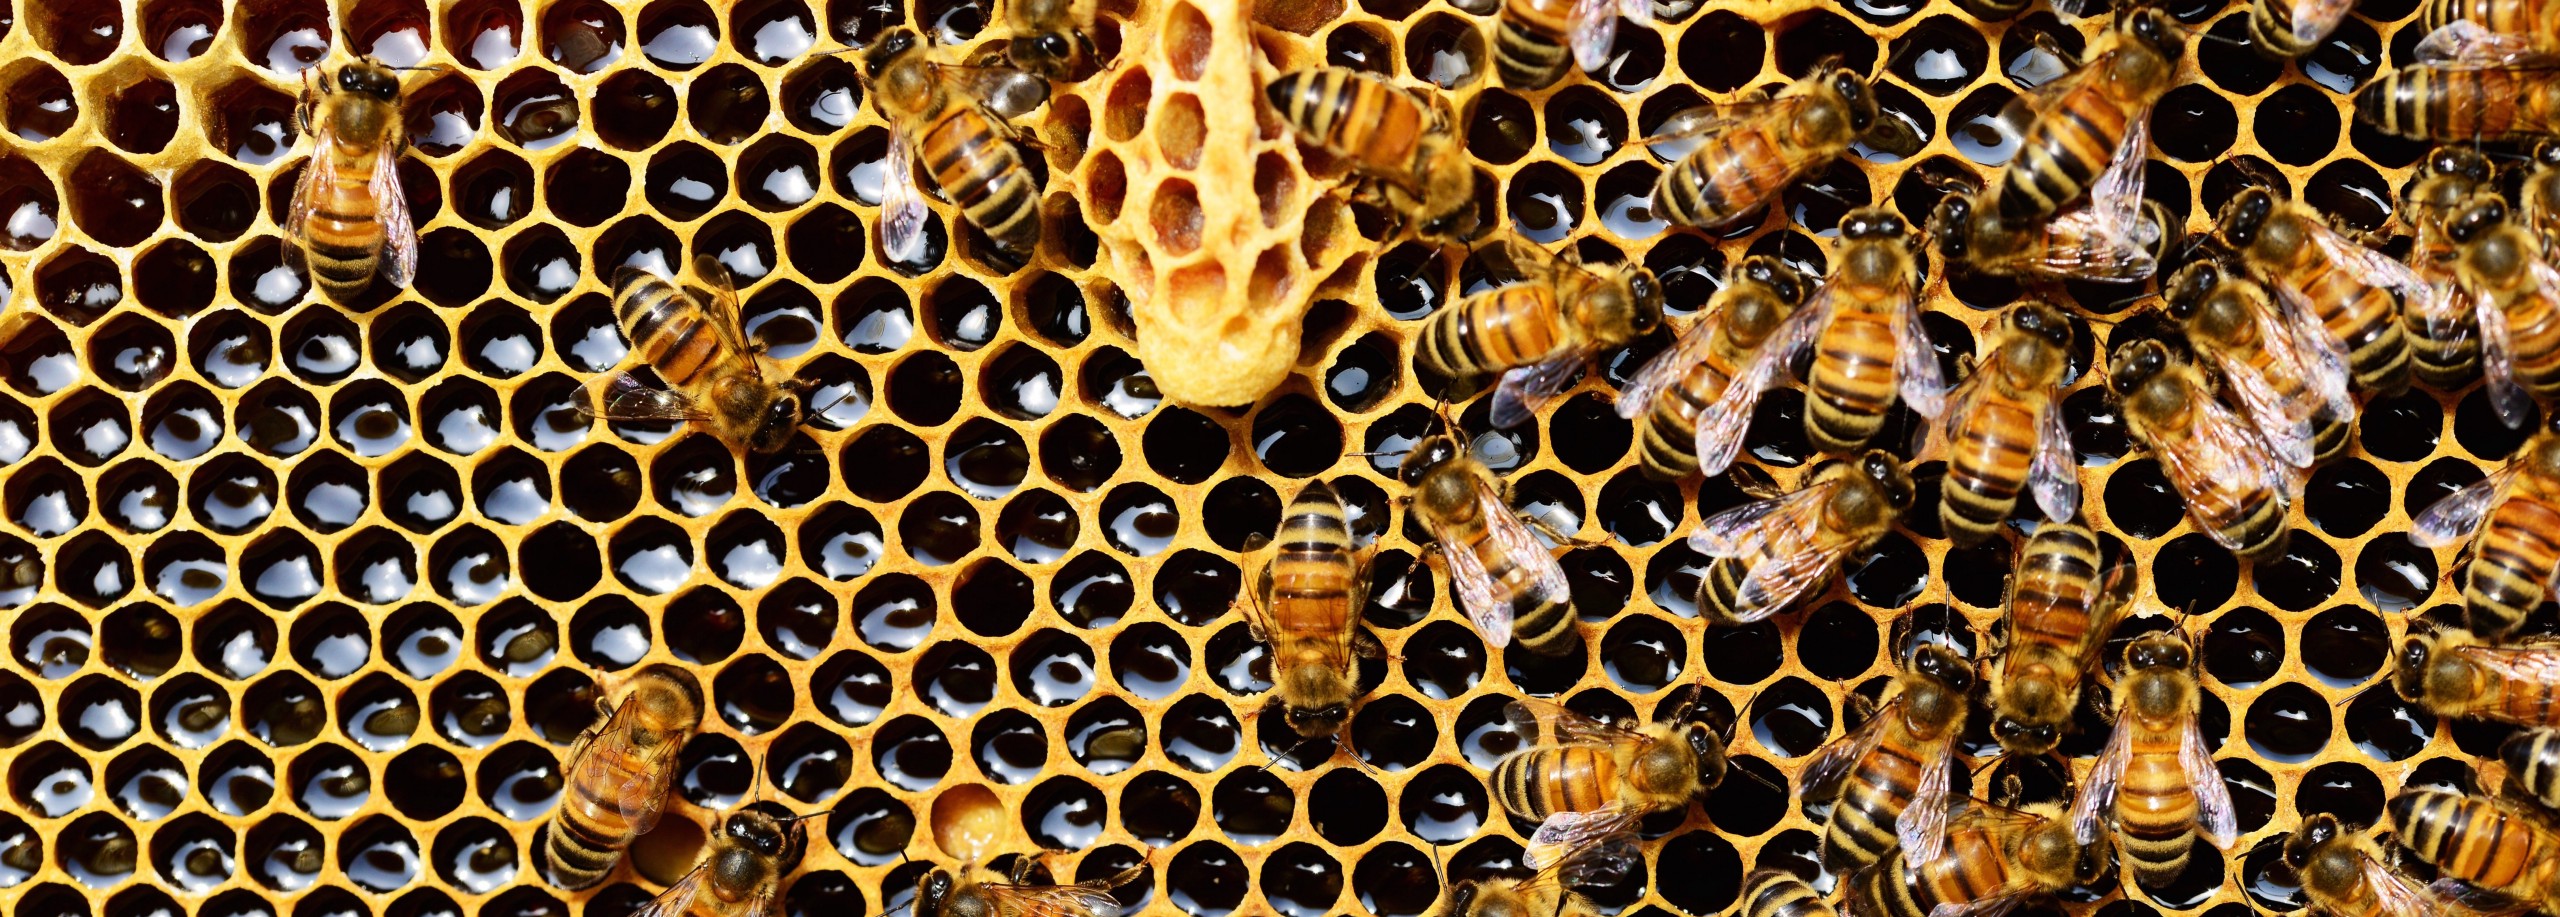 38/5000 bees working on their honeycomb